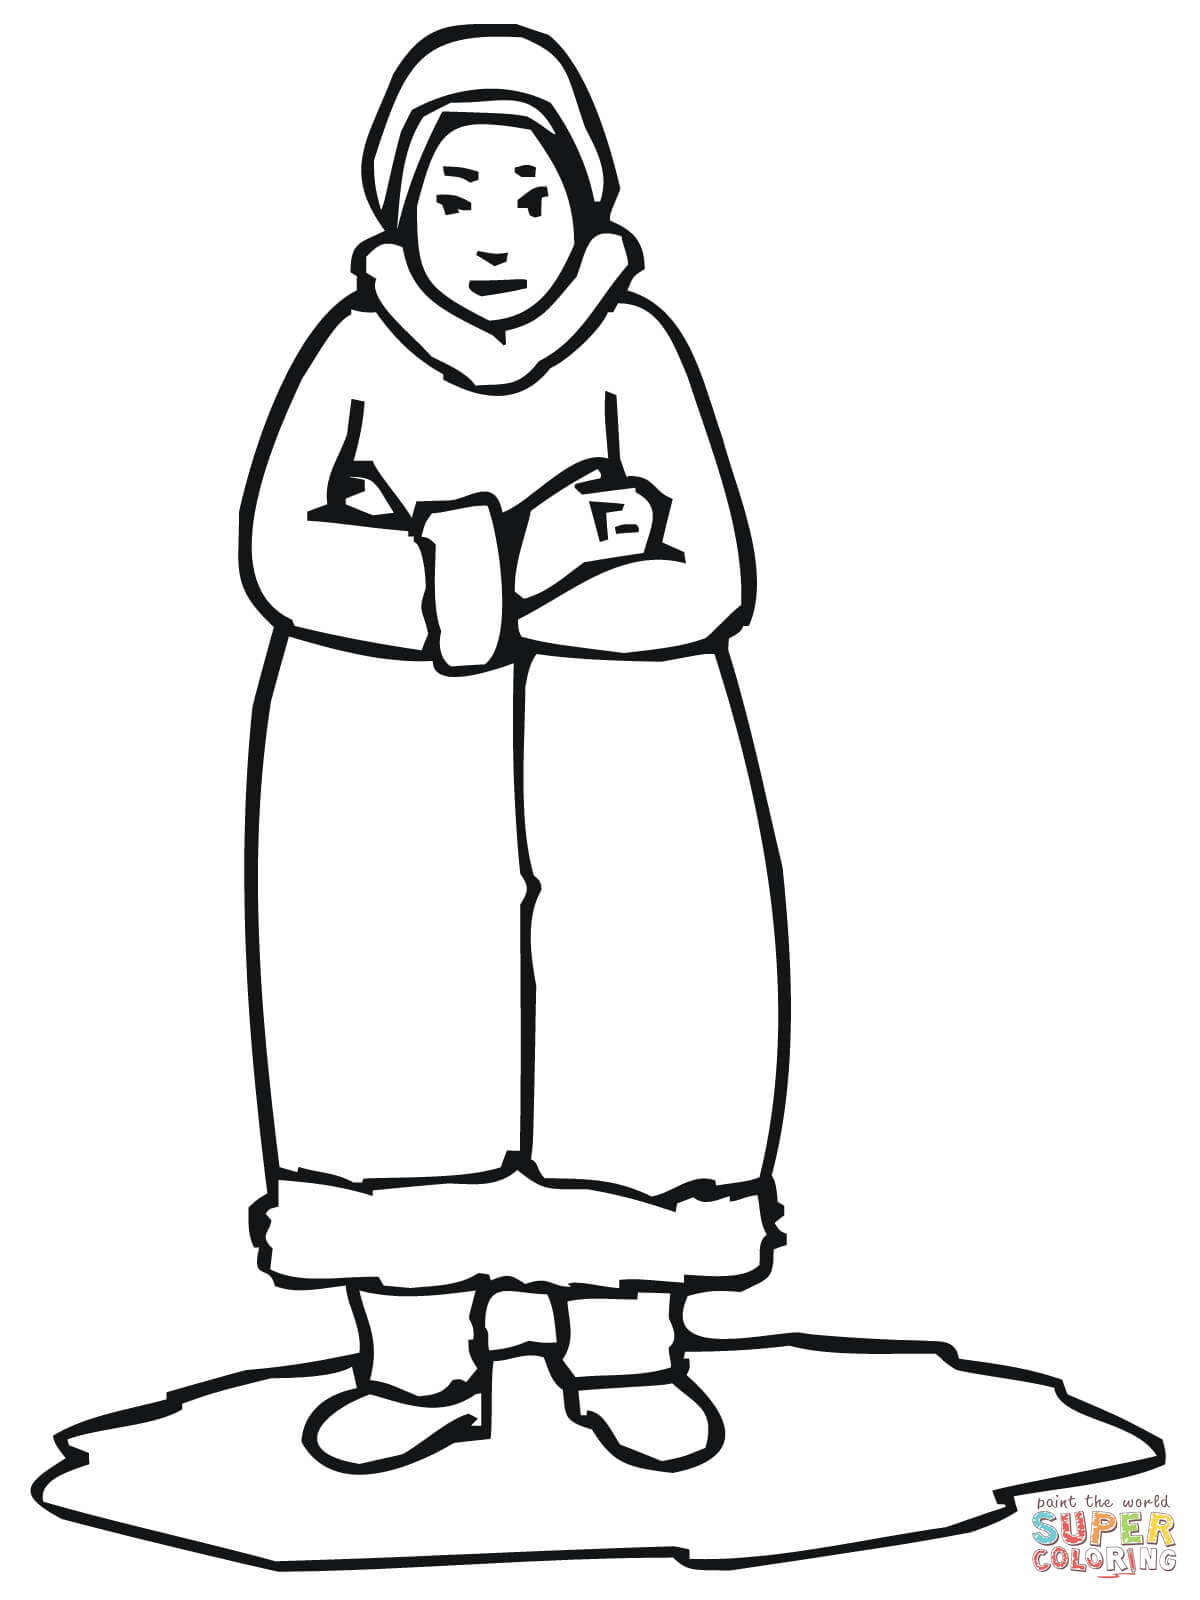 Inuit Coloring Pages Inuit Eskimo Coloring Pages Free Coloring Pages